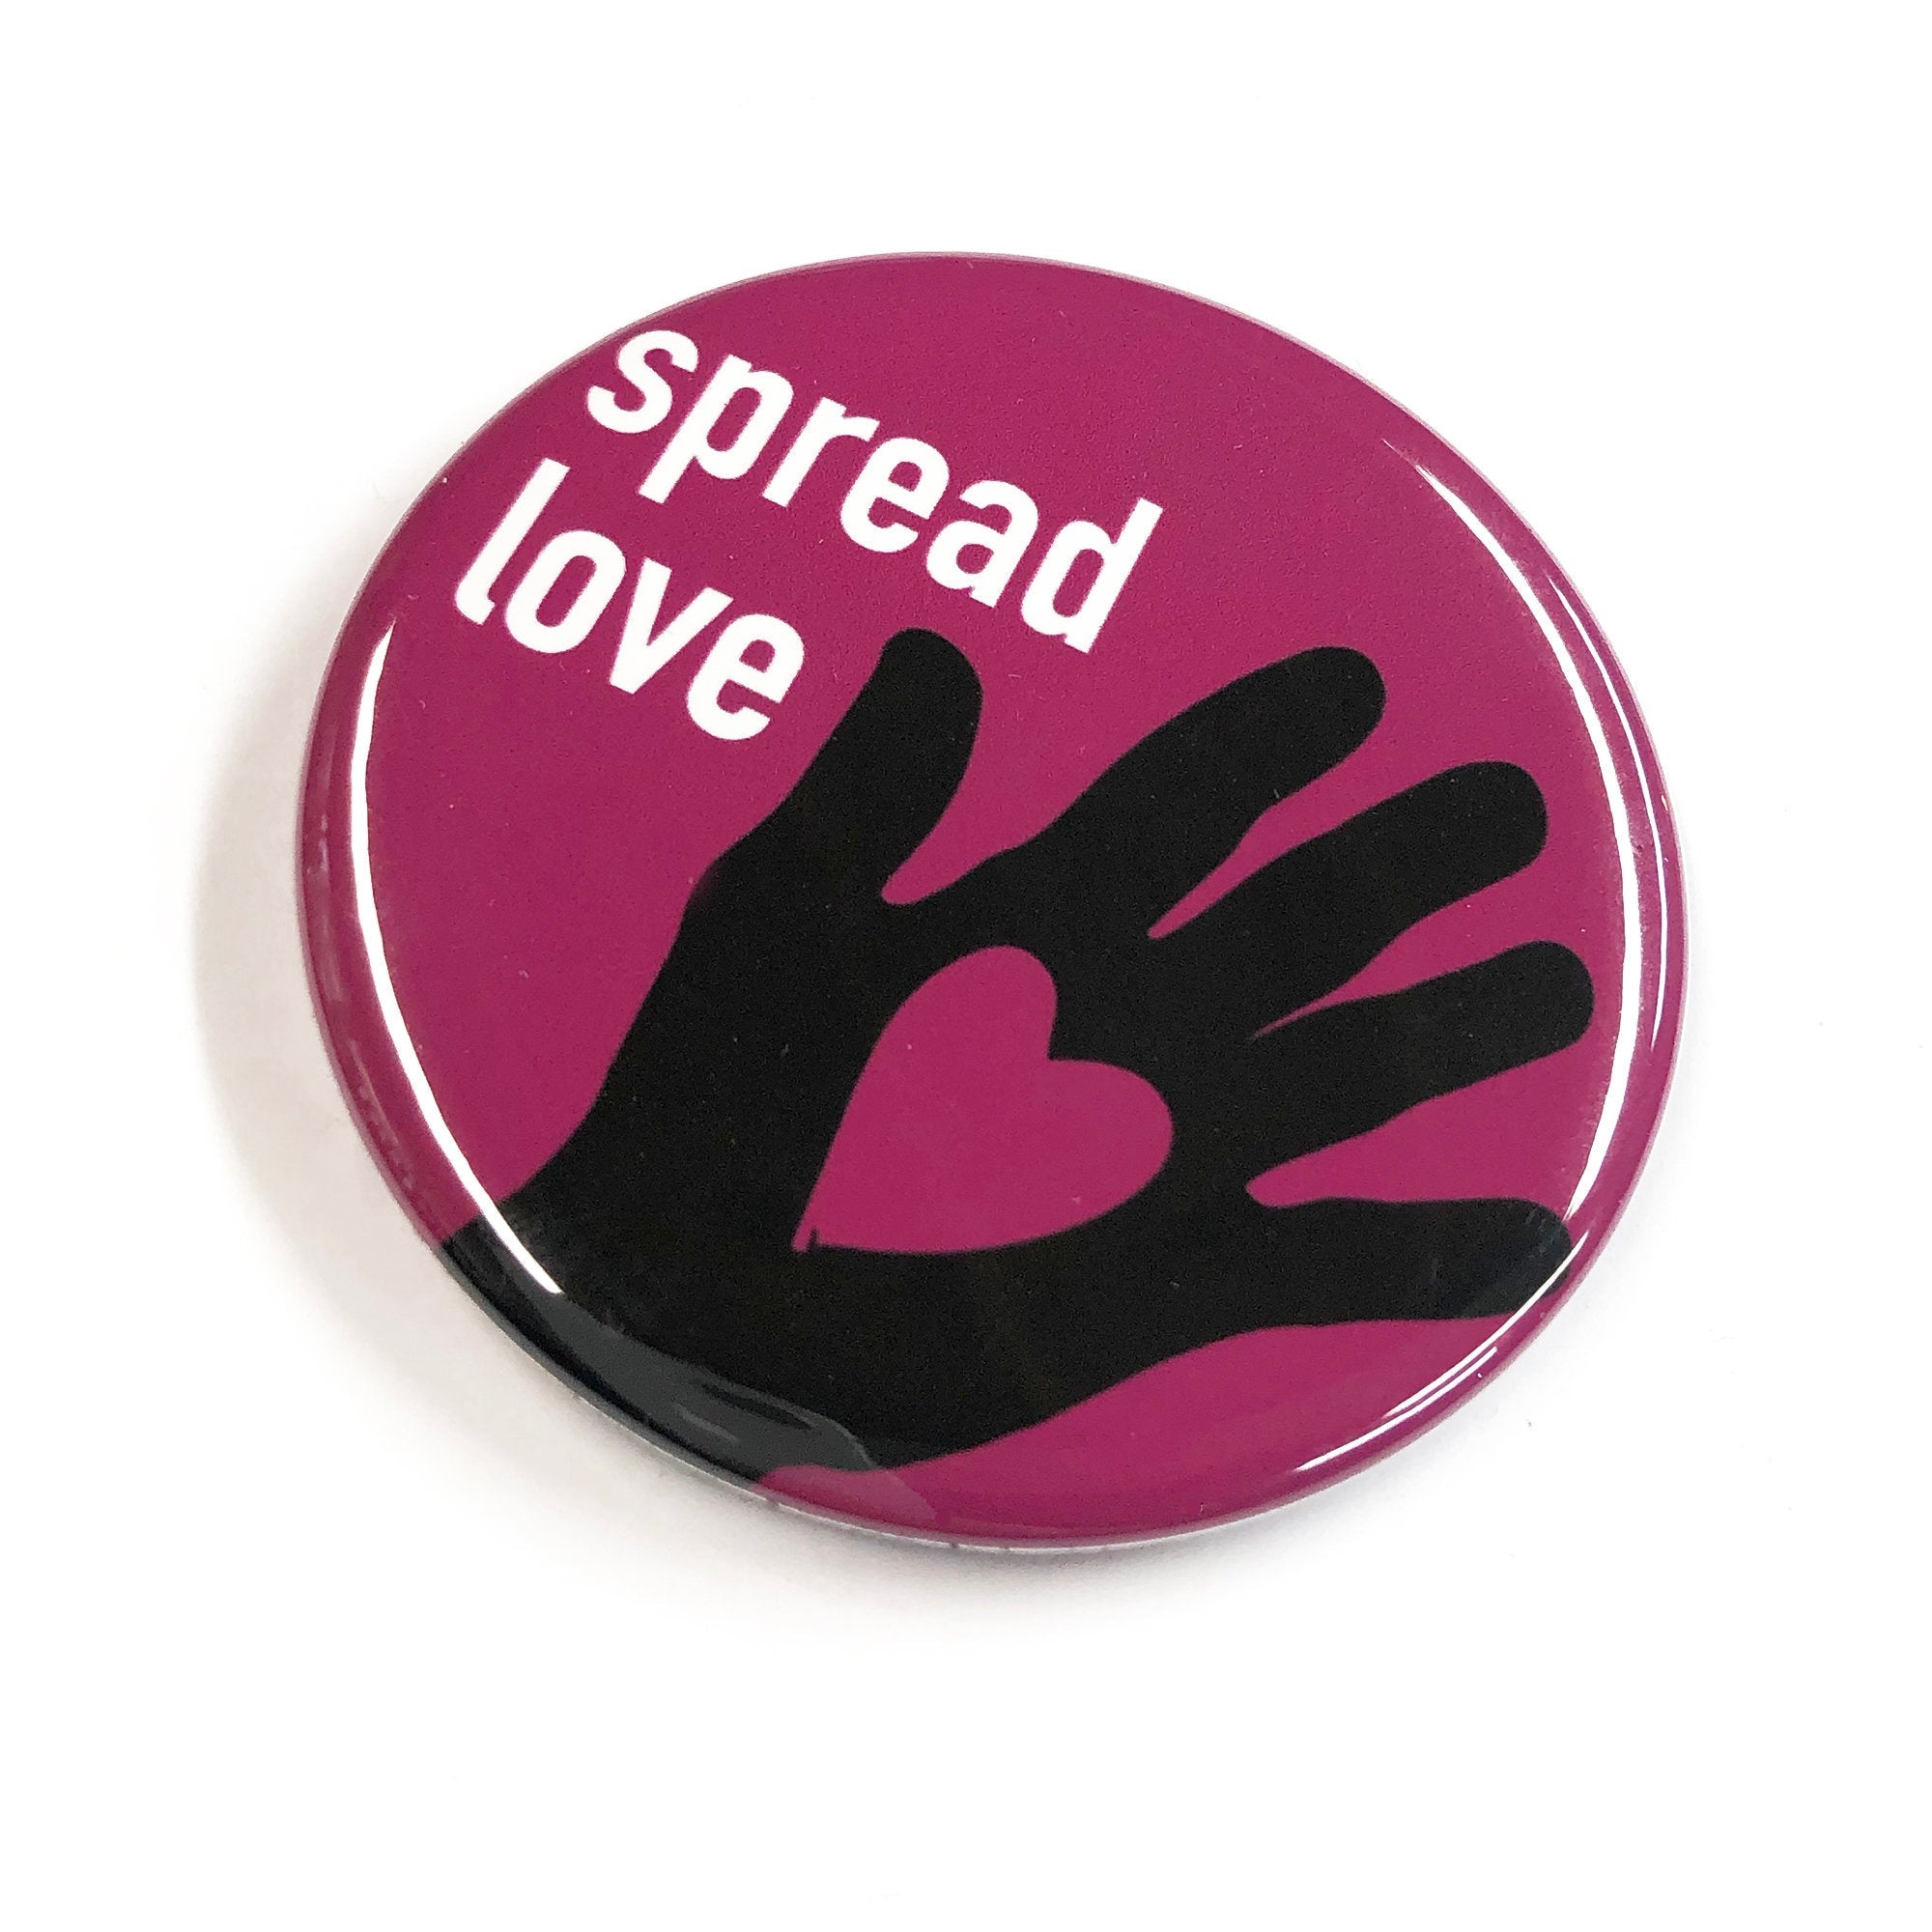 Spread Love Magnet, Pin Back Button or Pocket Mirror